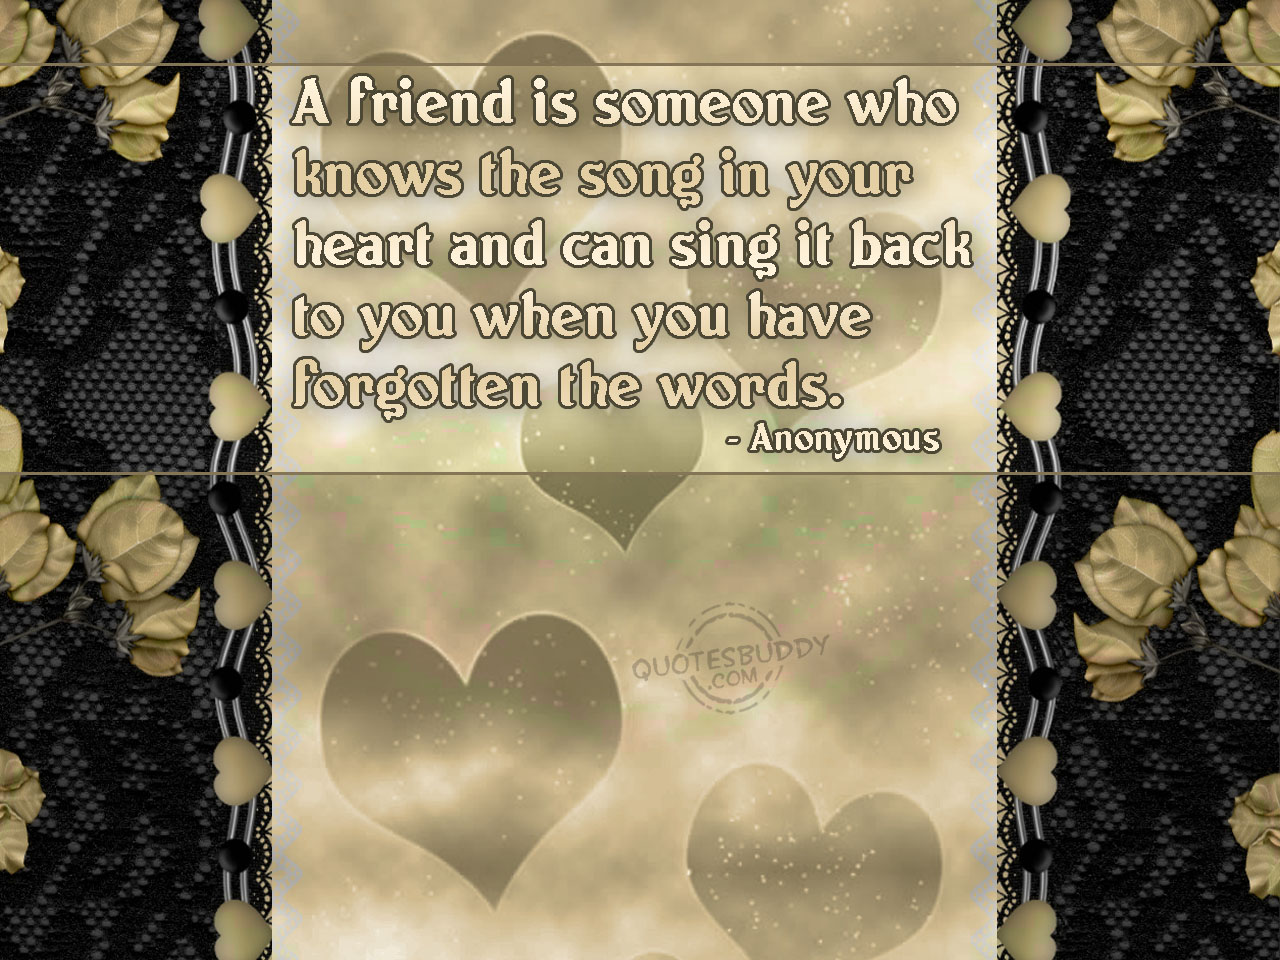 46+] Friendship Wallpapers with Quotes - WallpaperSafari